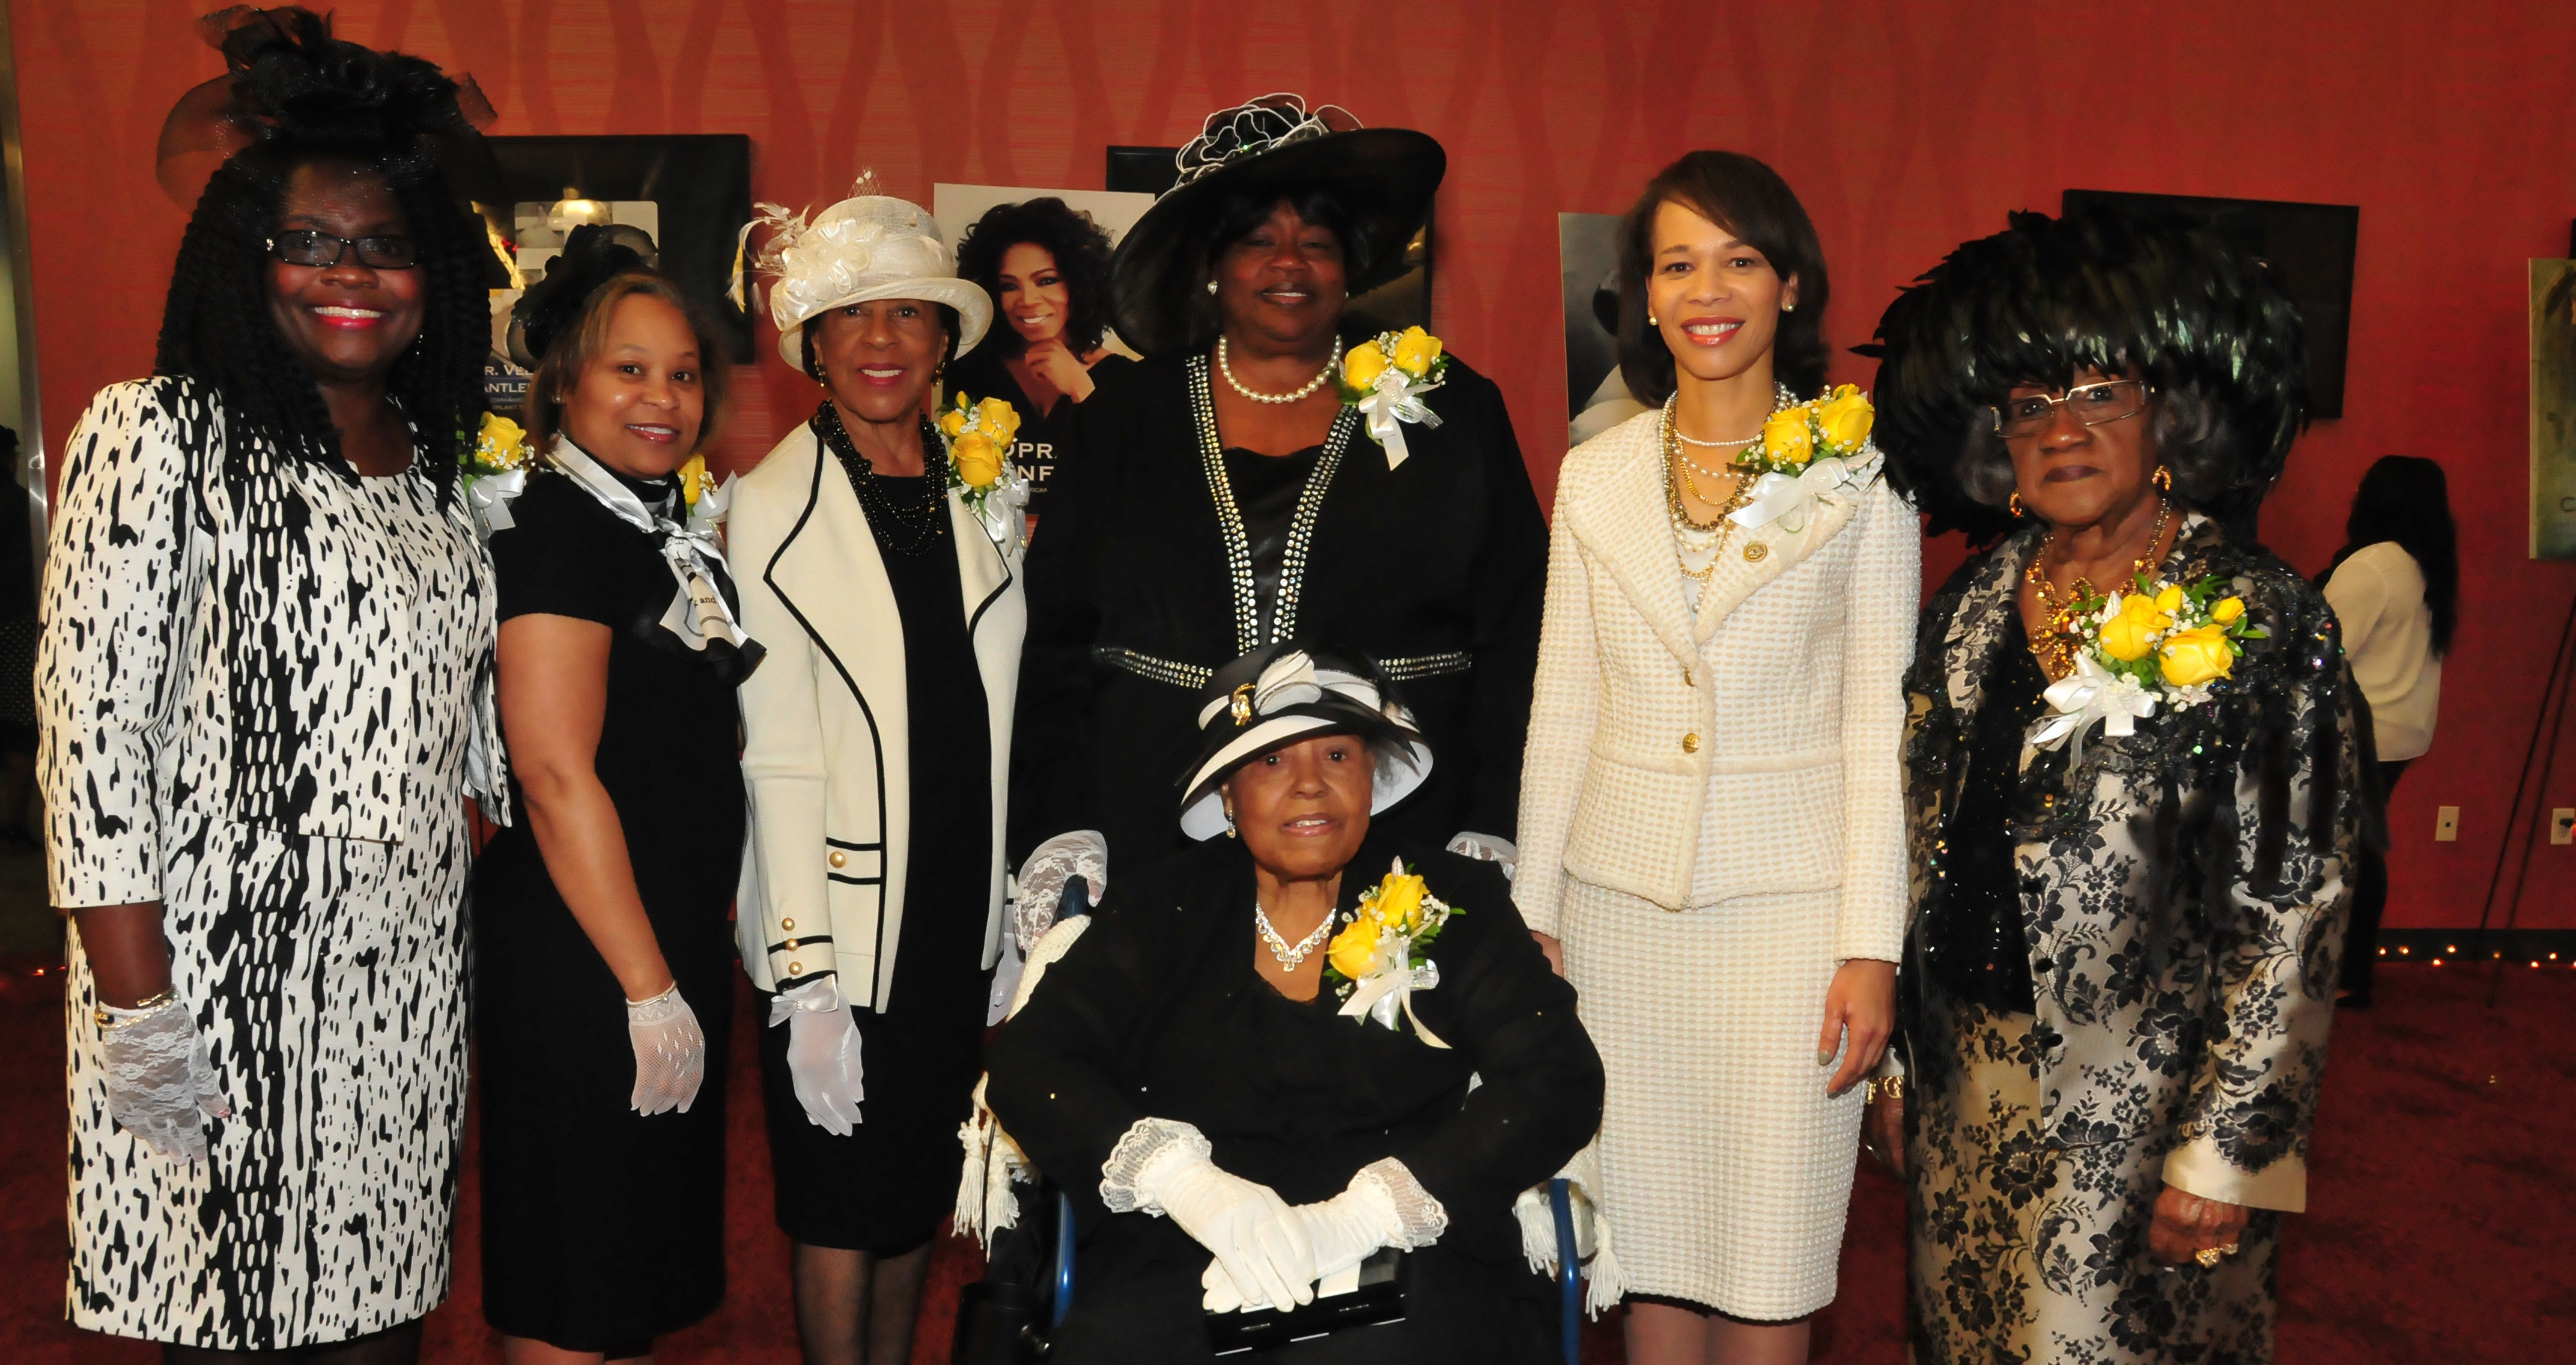 The co-chairs of the 2017 First Lady’s Hats and Gloves Tea with this year’s honorees: (seated in front) Mary Maloy Scott; (standing l-r) Co-chair Enid Wallace-Simms, DSU First Lady Dr. Robin Williams, honorees Dr. Lozelle De Luz, Bernice Edwards, U.S. Rep. Lisa Blunt Rochester, and co-chair Virginia L. Carson.